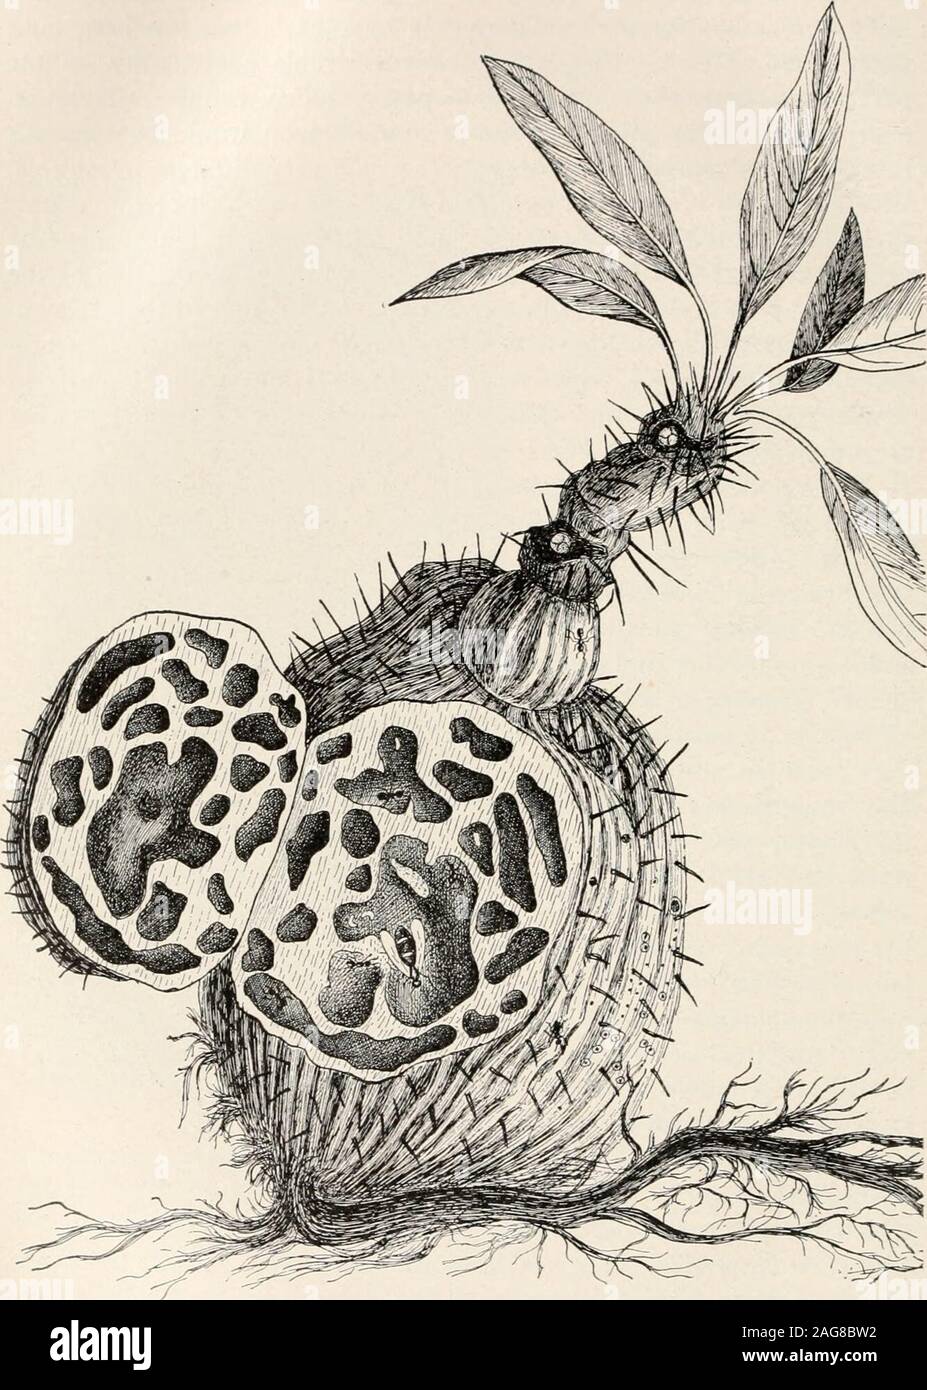 . Ants; their structure, development and behavior. FIG. 175. Hydnophytuui nwntanitinof Siam, showing pseudobulb in sec-tion. (Forel.) Of by older and larger trees areAzteca nmclleri, which per- 21 ANTS.. FIG. 176. Myrmecodia pentaspenna of Bismarck Archipelago, with pseudobulbopened to show ants (Iridomyrmex cordatus) inhabiting the cavities. (Dahl.) RELATIONS OF ANTS TO VASCULAR PLANTS. 3°7 is still young (50 cm. to 2 m. high) at a particular point, a smalldepression at the upper end of a furrow at the top of the internode,where, as Schimper has shown, the wall lacks the fibro-vascular bun-dl Stock Photo